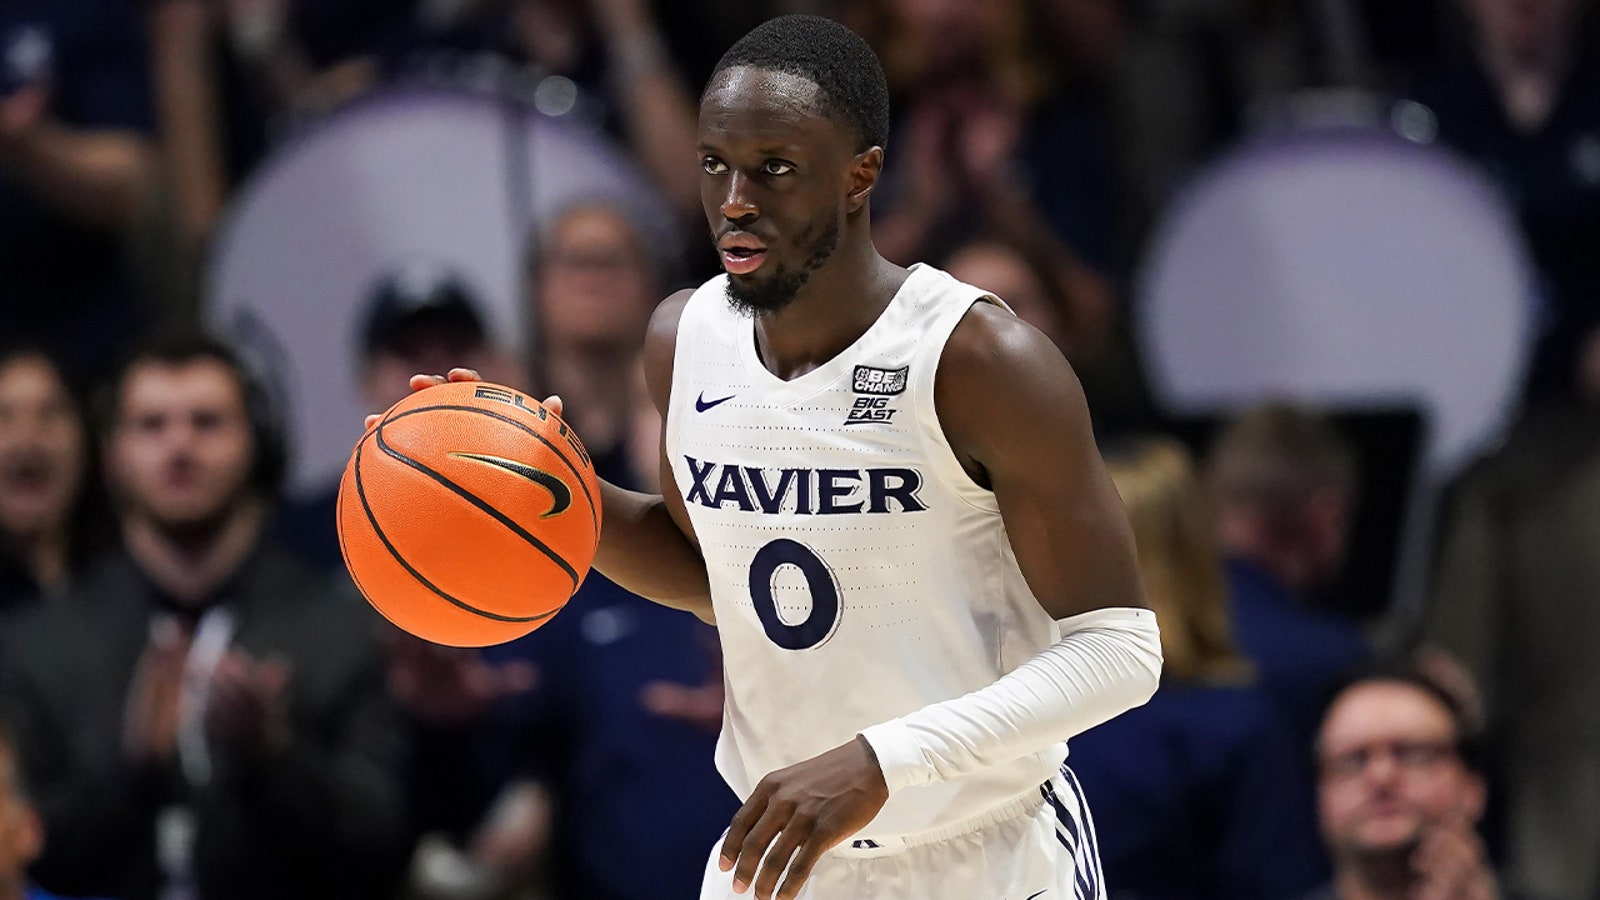 Souley Boum drains clutch shot to seal Xavier's victory